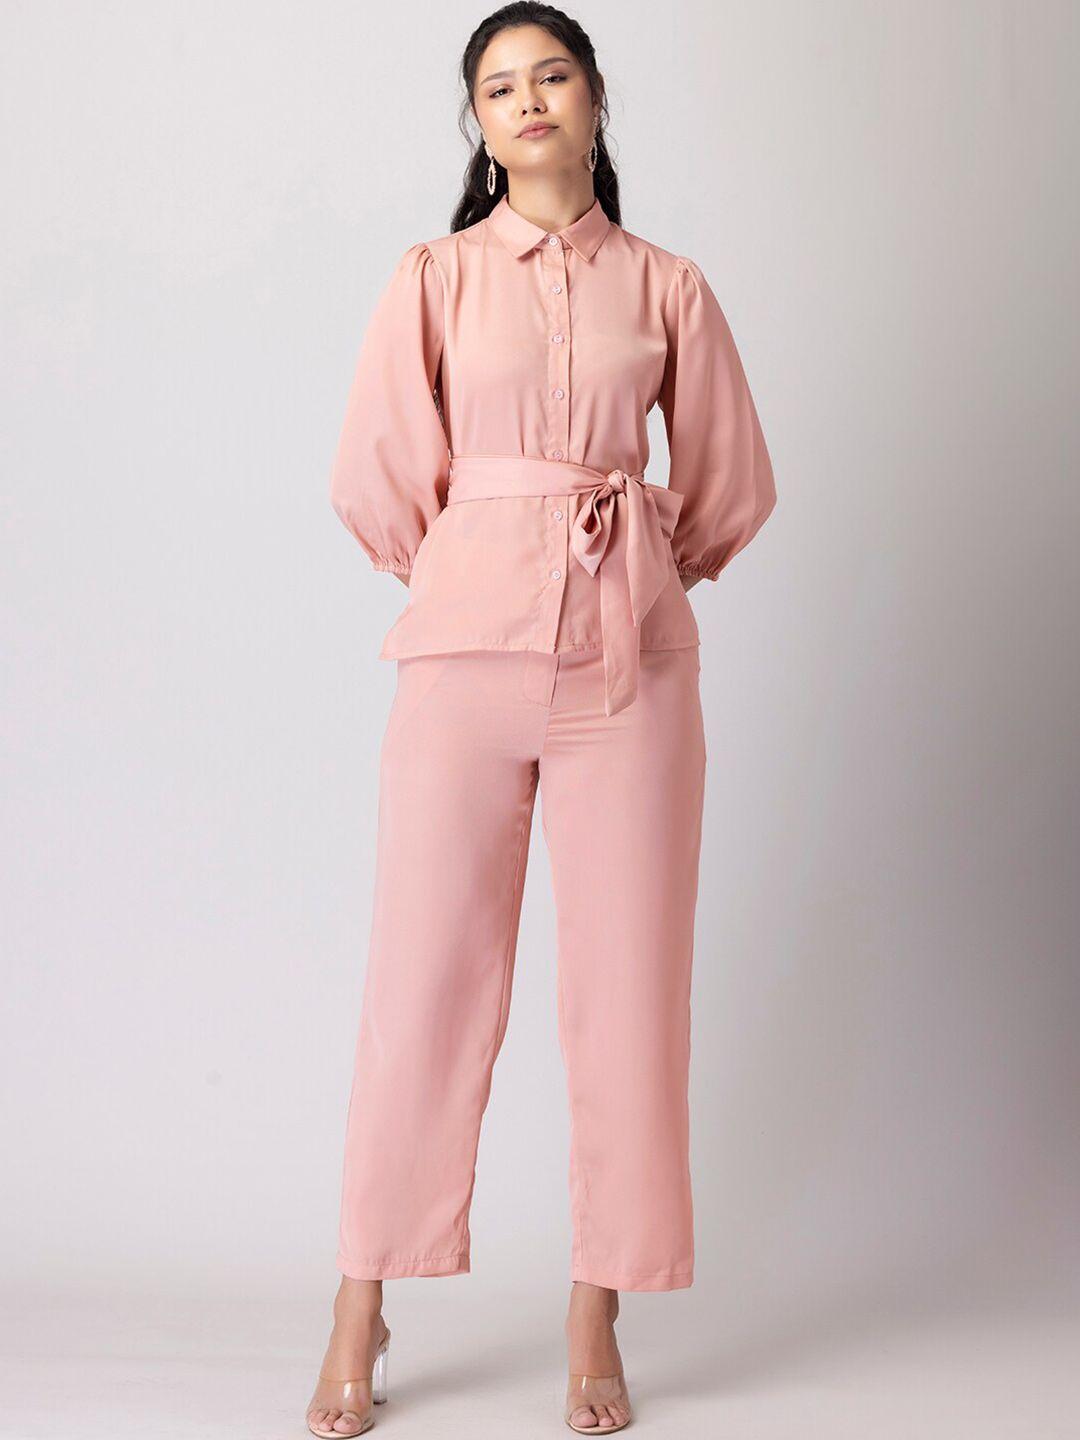 faballey peach coloured spread collar shirt & trousers with belt